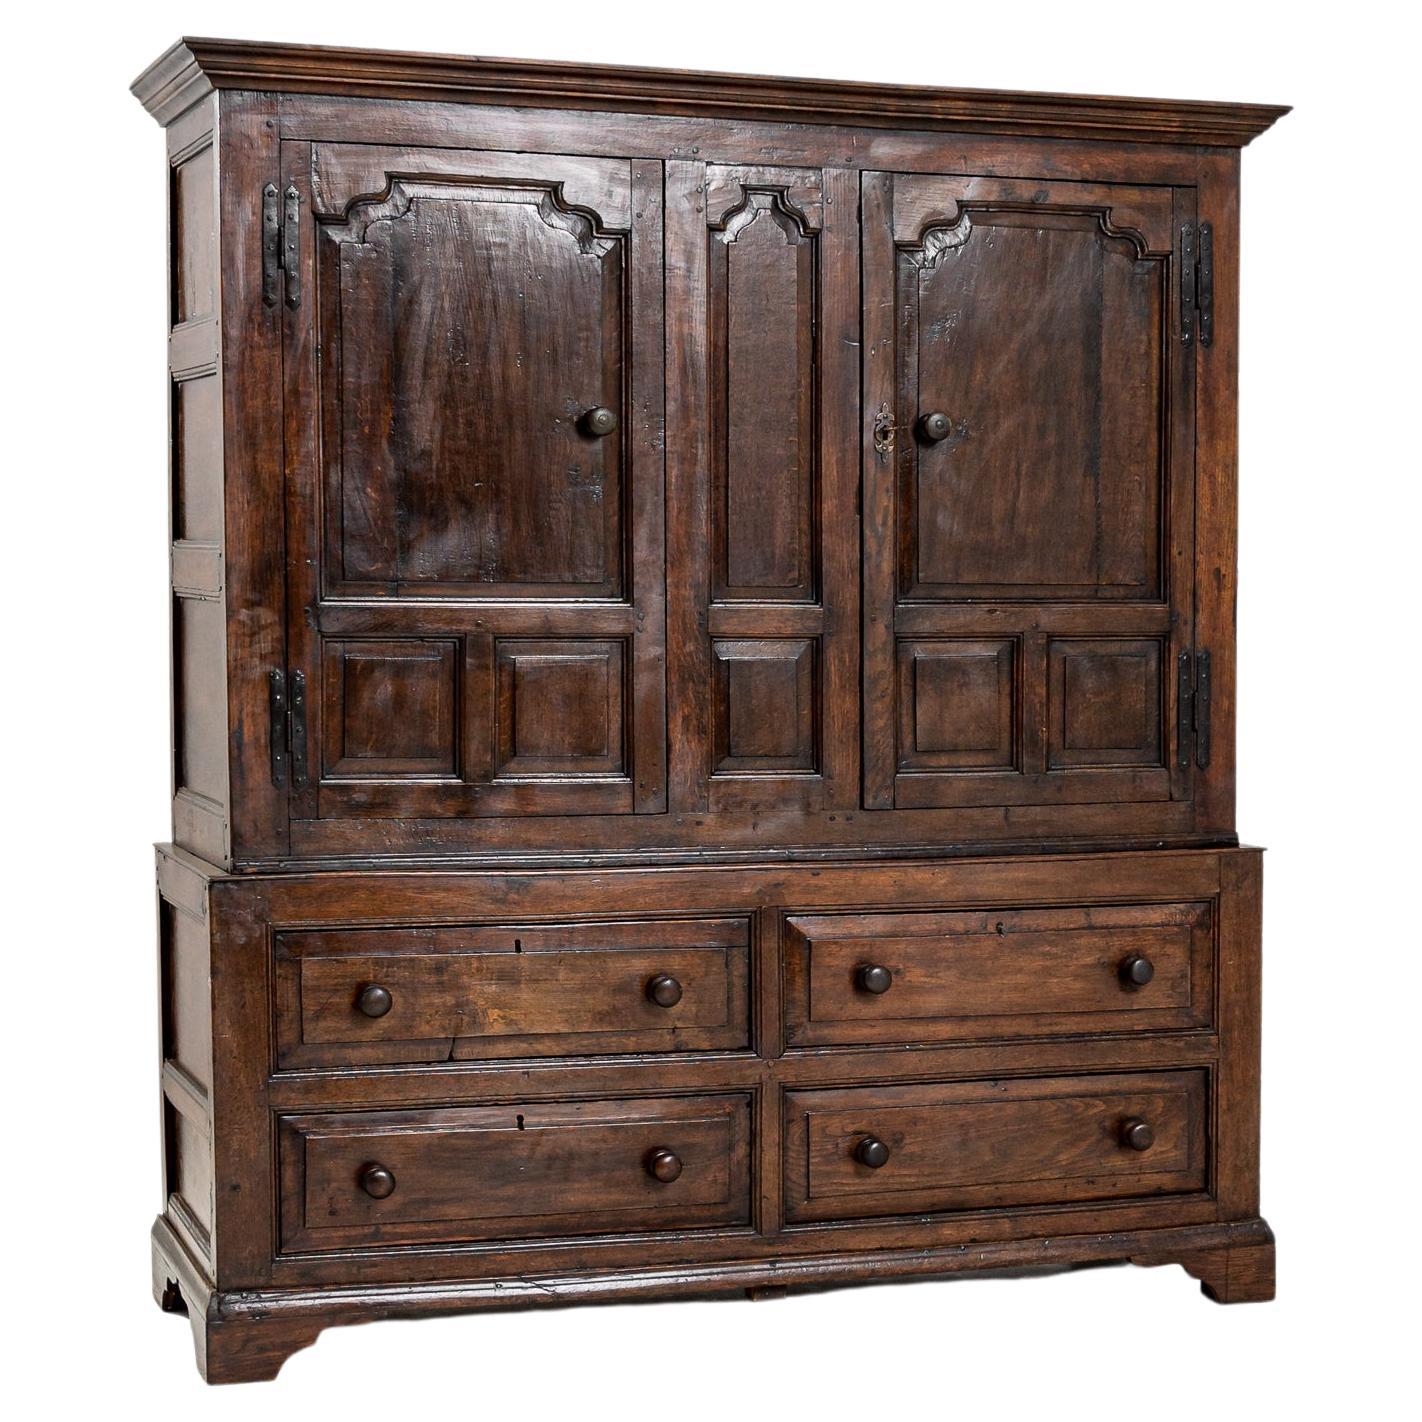 19th Century British Cabinet with Original Patina For Sale